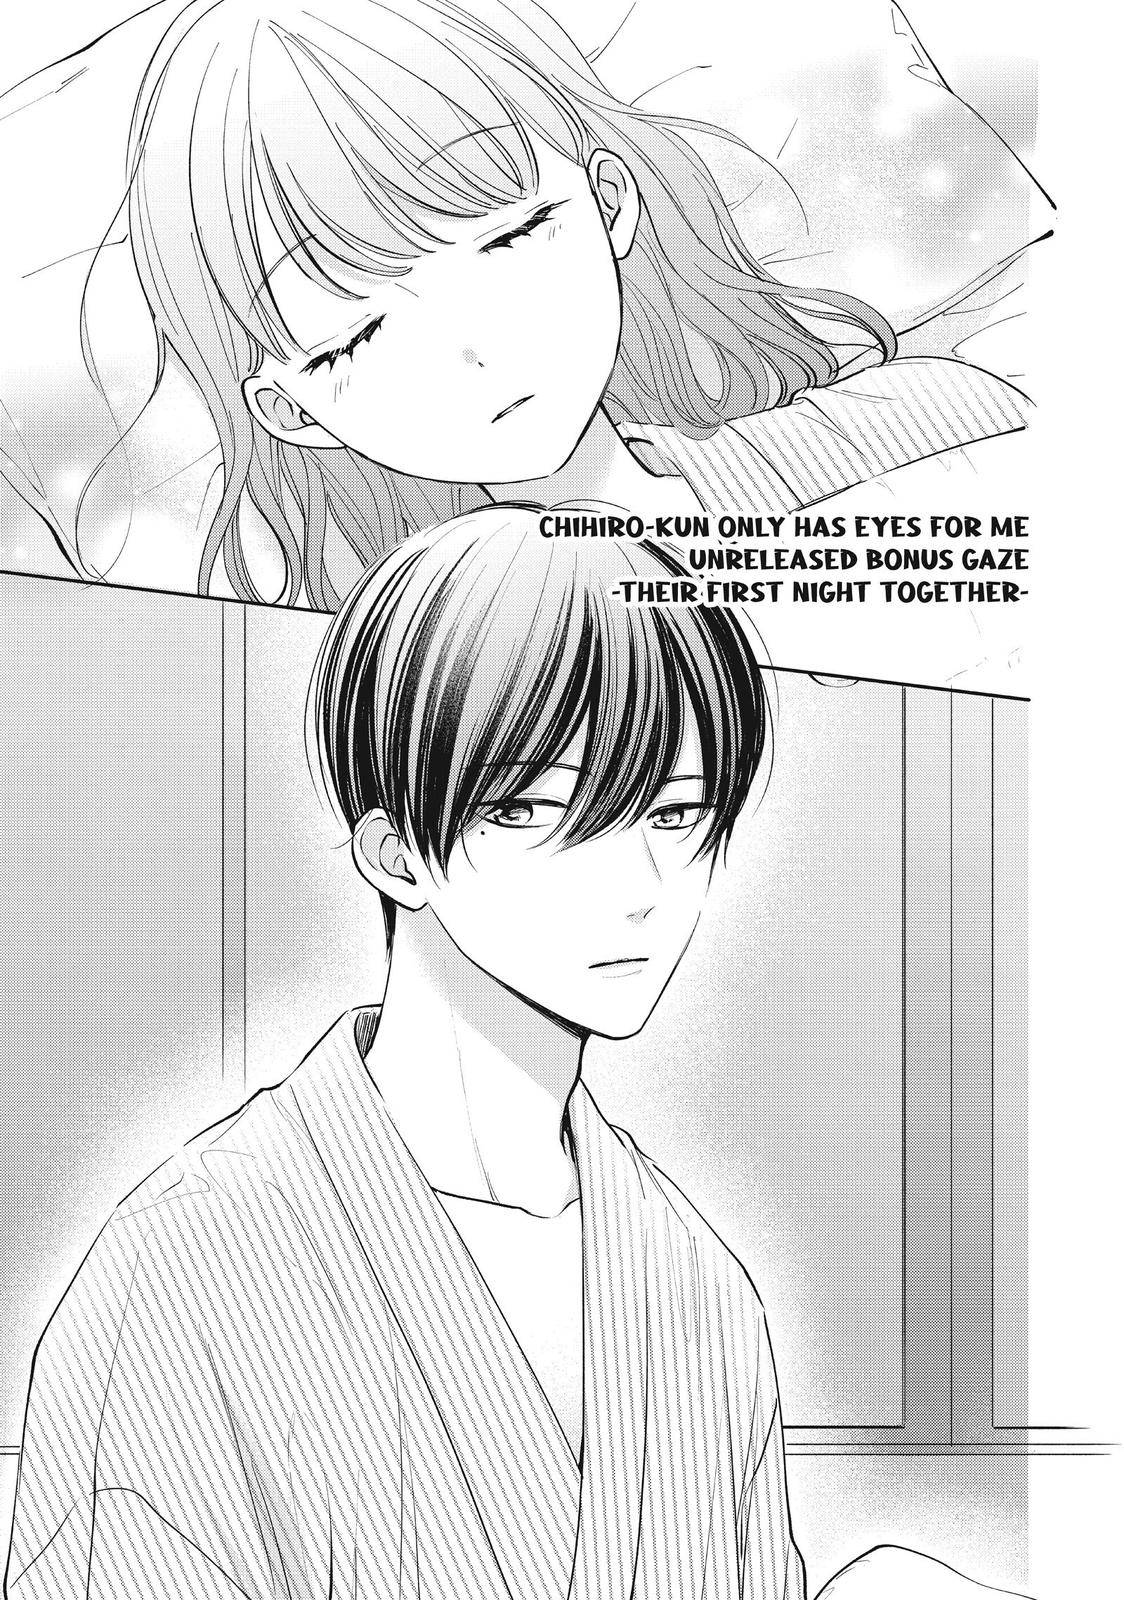 Chihiro-kun Only Has Eyes for Me - chapter 24.5 - #1